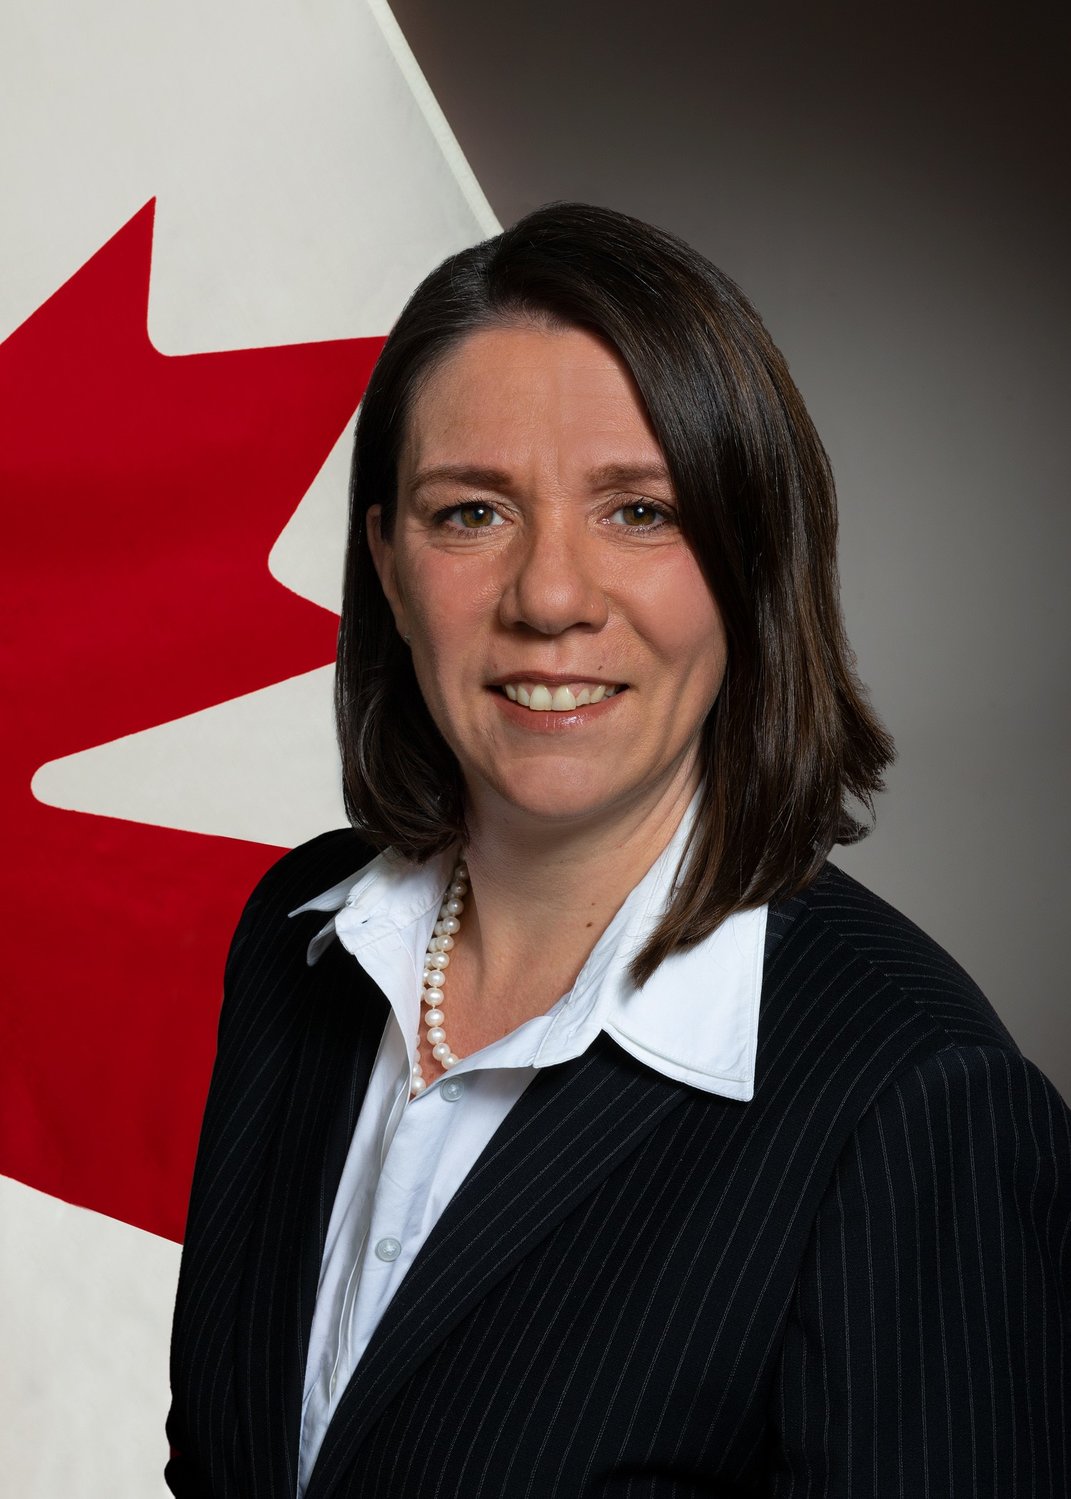 Rachel McCormick is the consul general of Canada to Texas and wrote the accompanying column to highlight the partnership between the state and our northern ally.